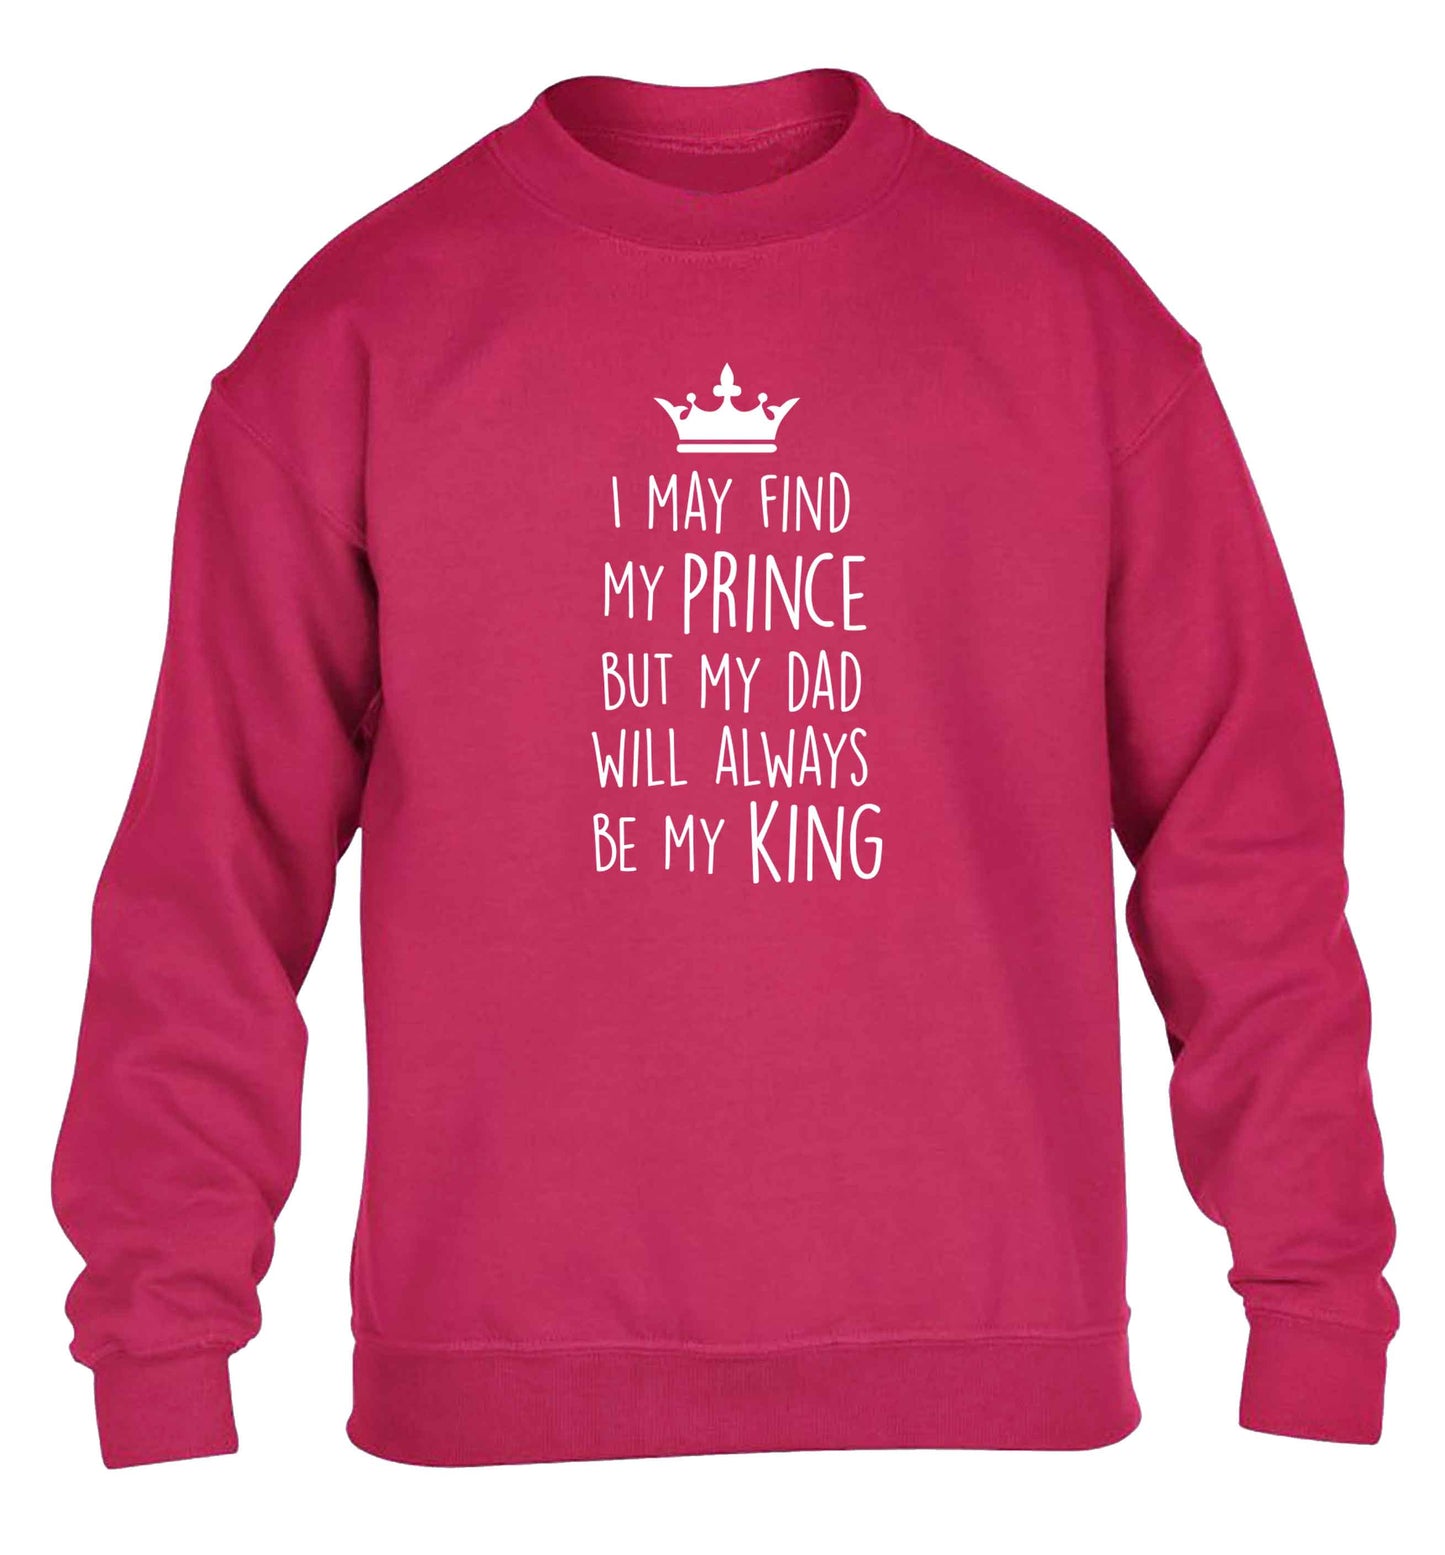 I may find my prince but my dad will always be my king children's pink sweater 12-13 Years